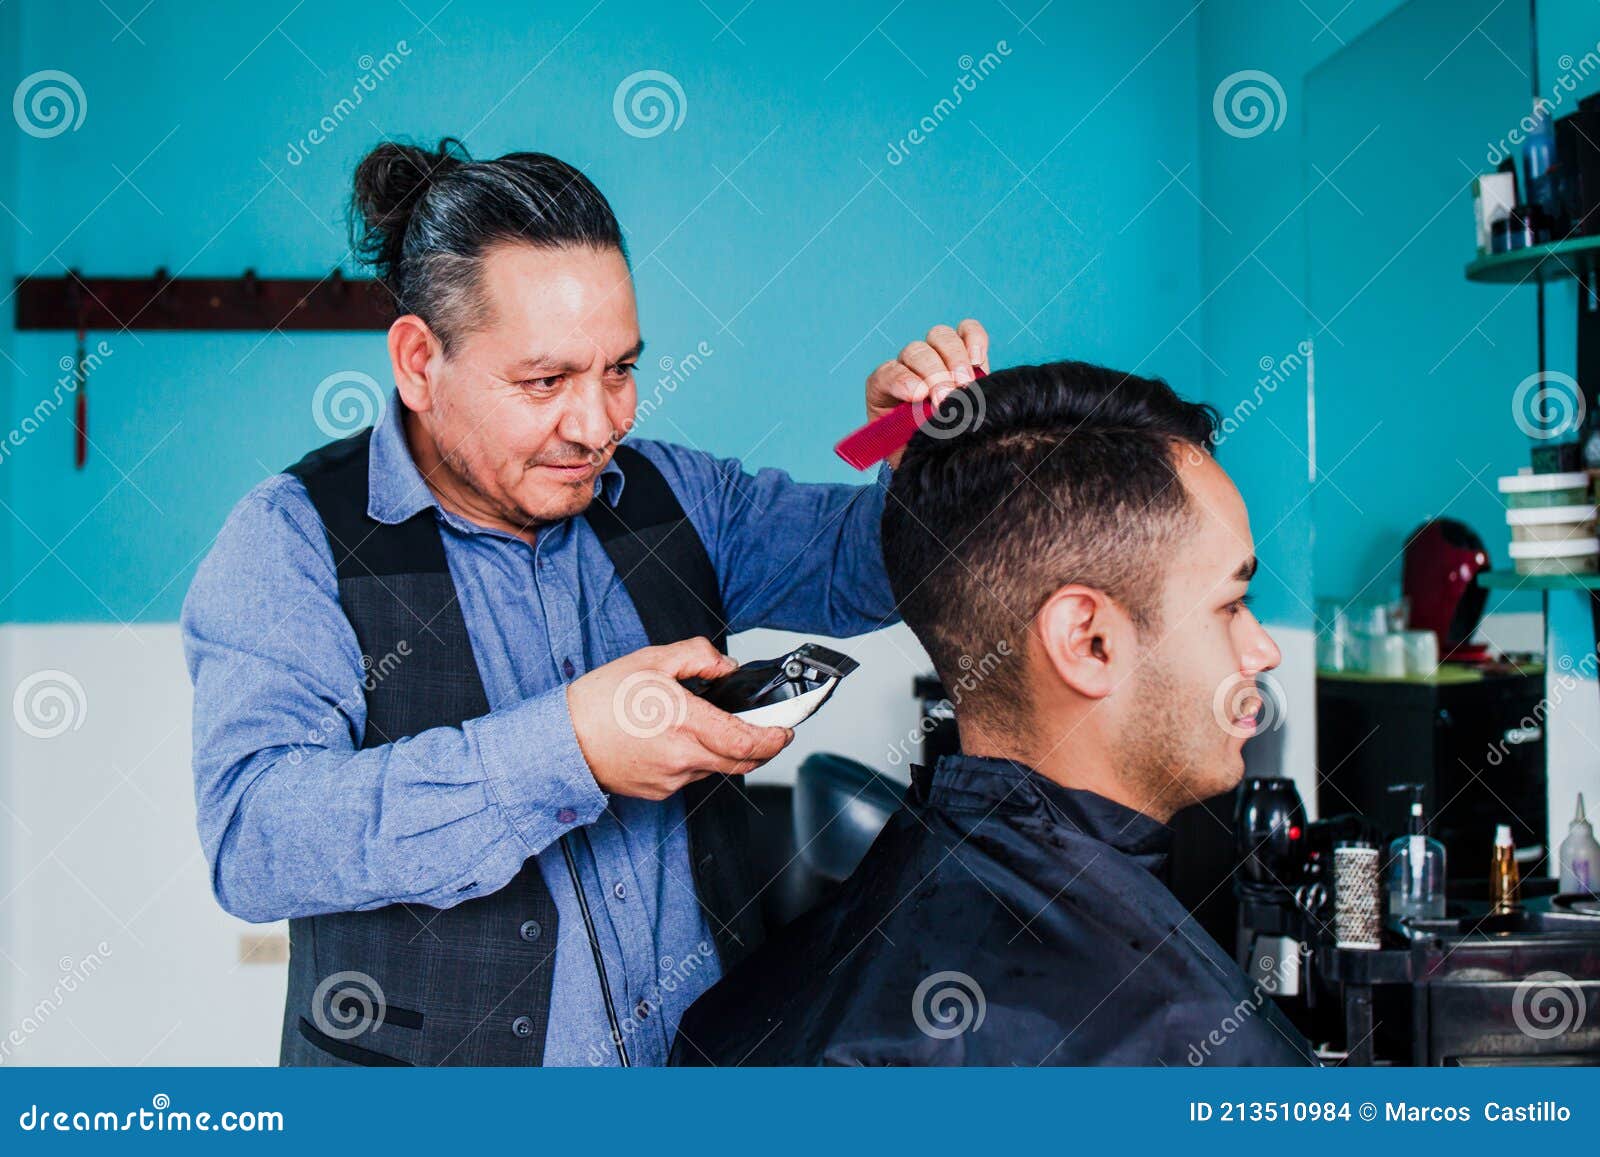 latin man stylist cutting hair to a client in a barber shop in mexico